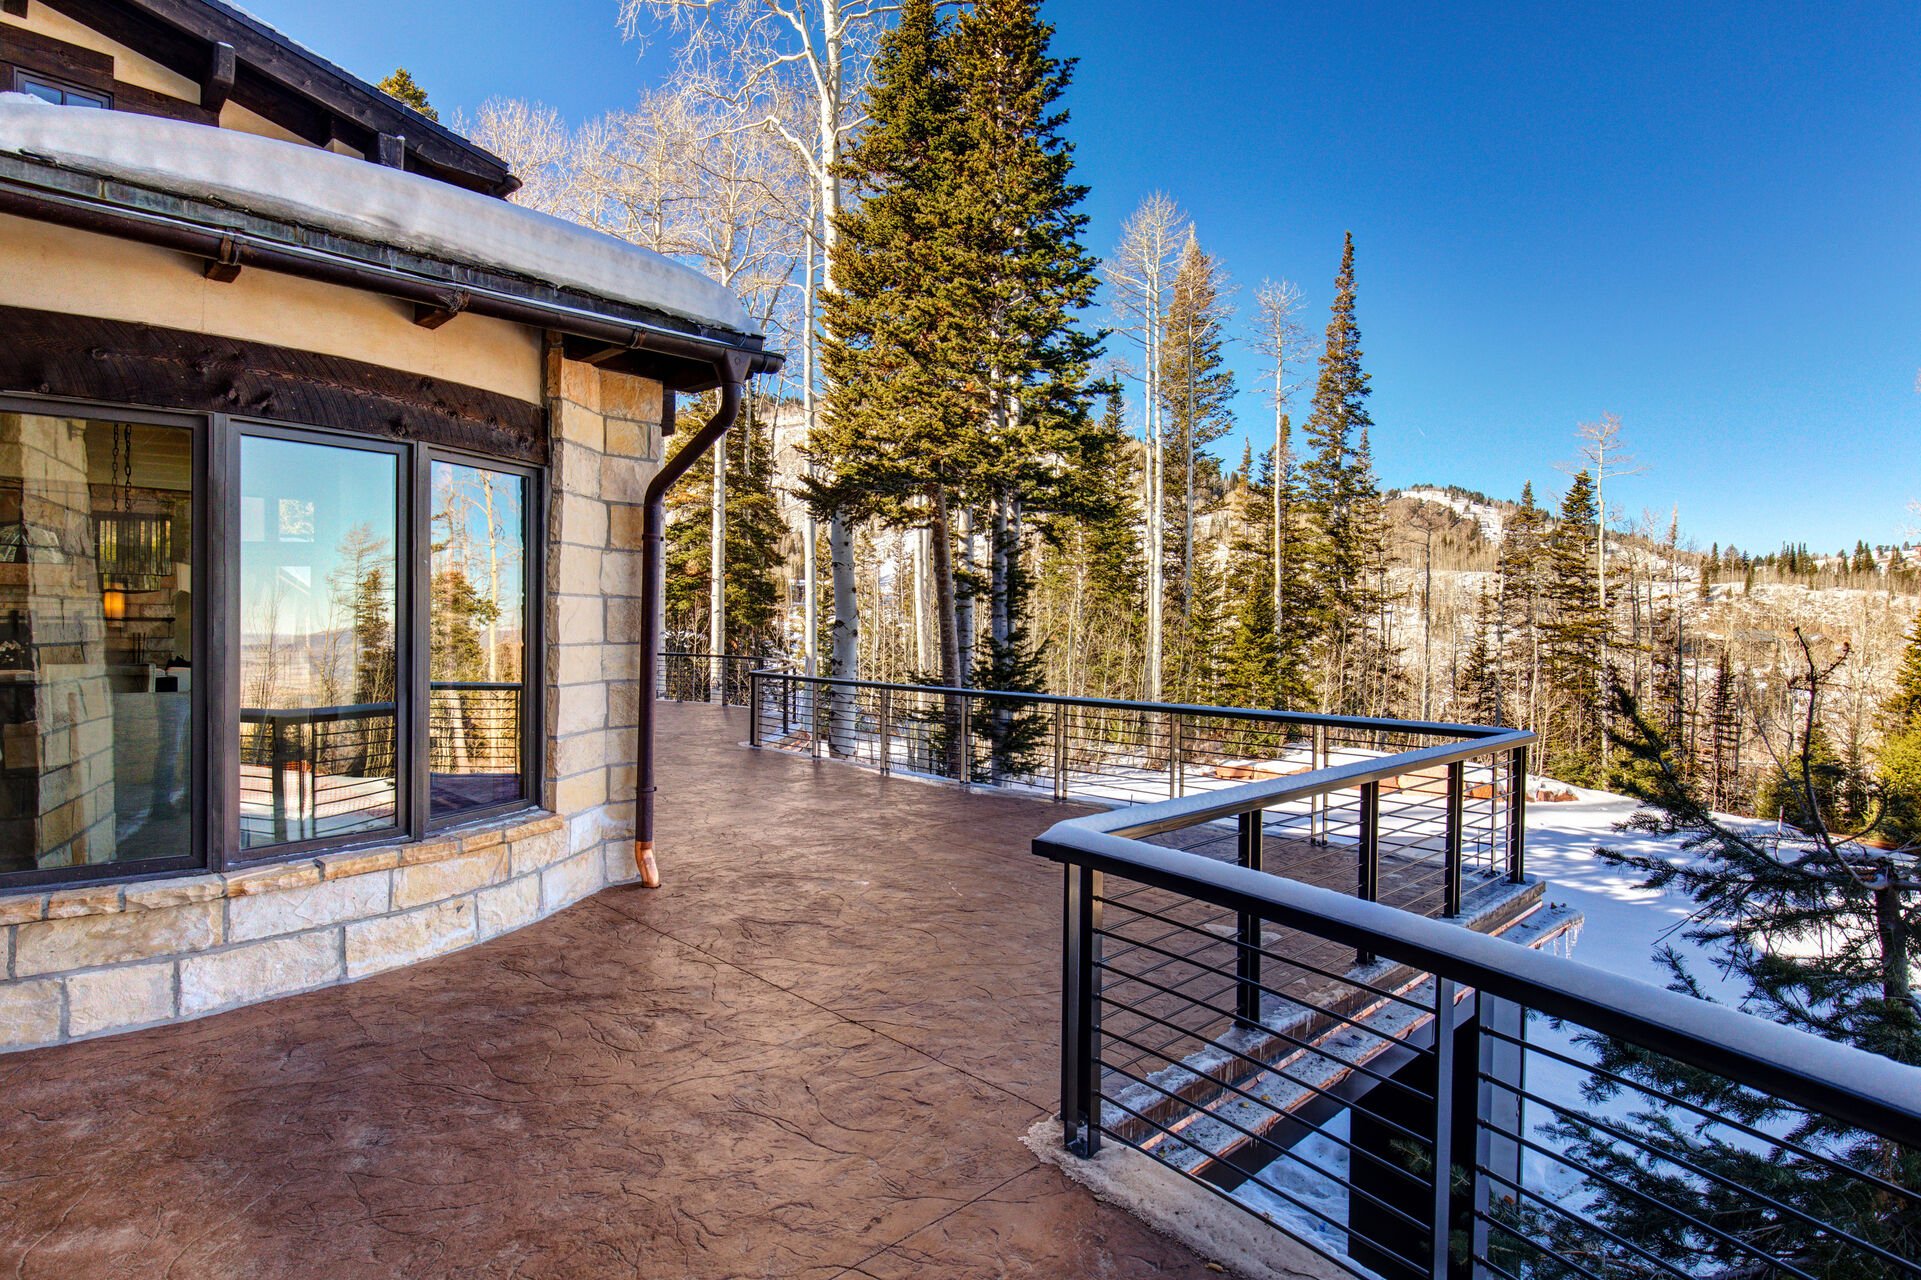 Take in the gorgeous surrounding views of Park City and the Mountainis